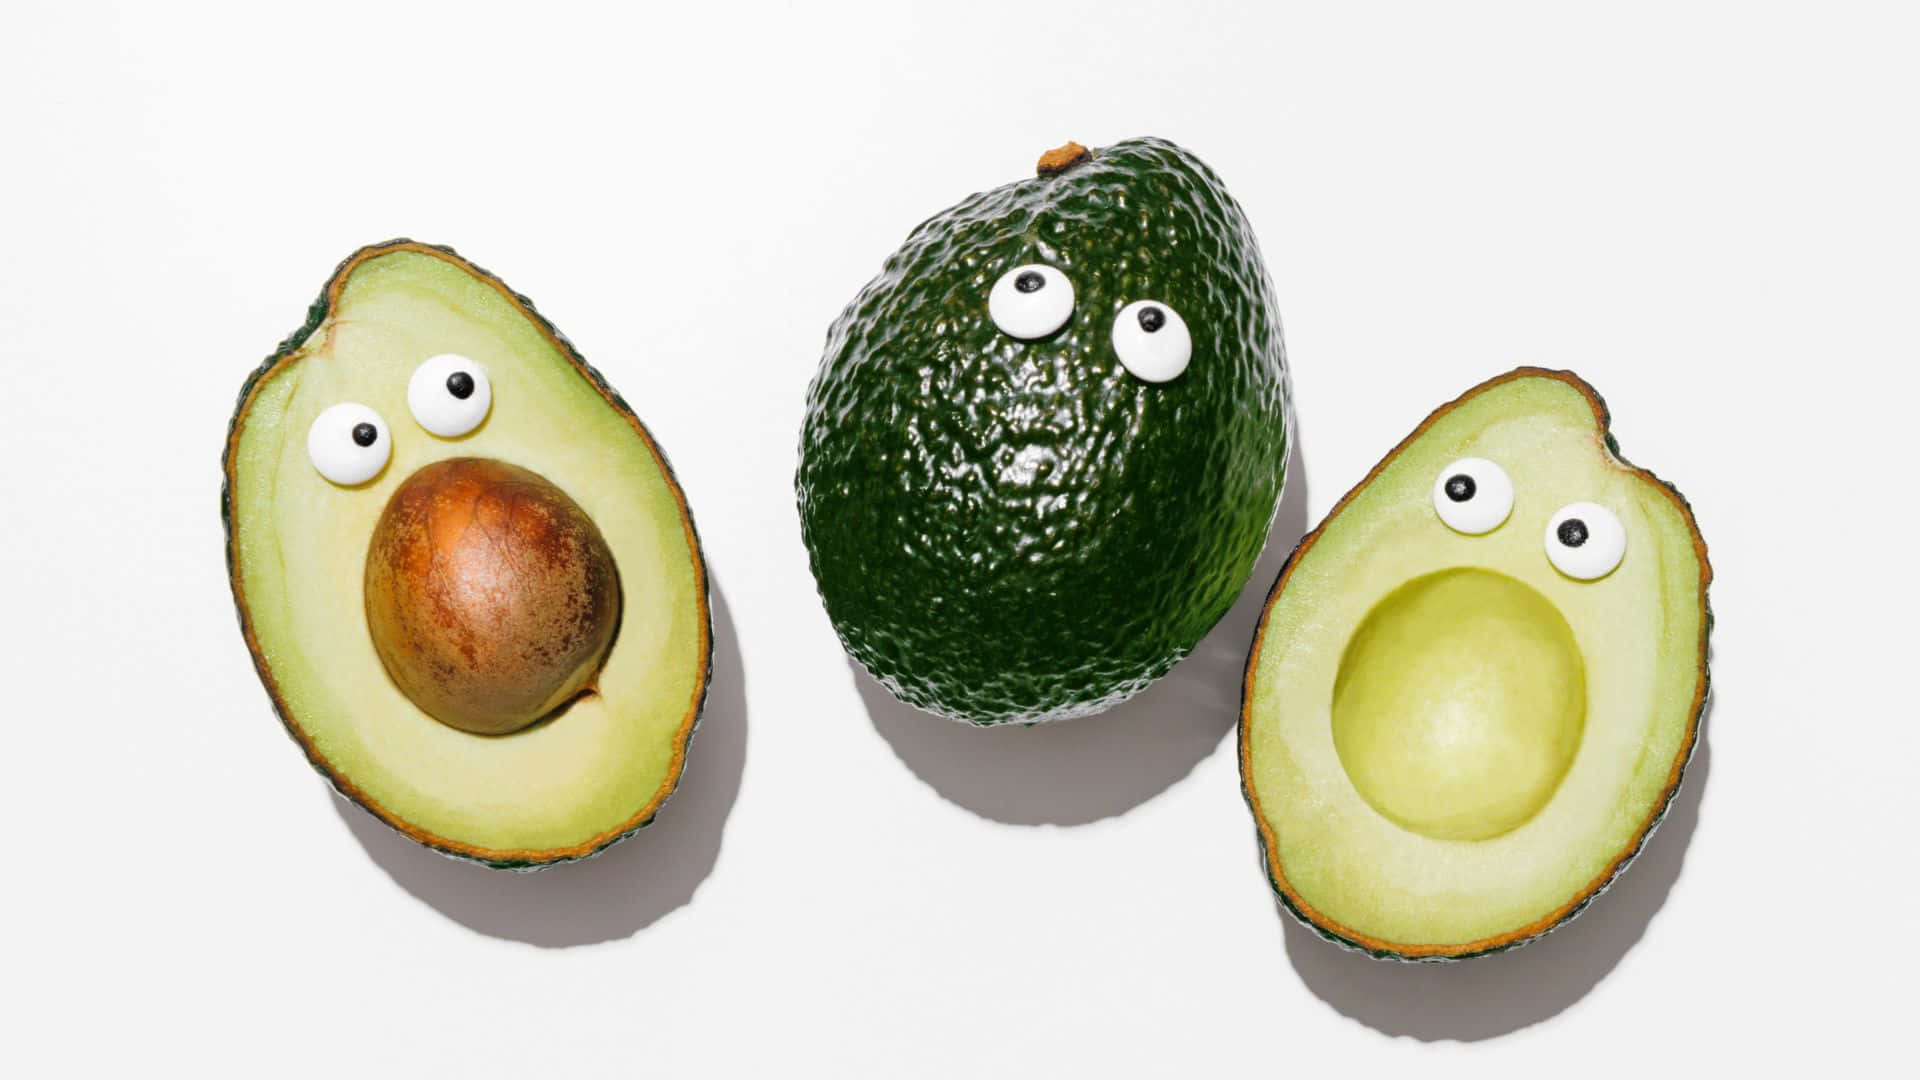 Adorable Avocado Friends on a Vibrant Background